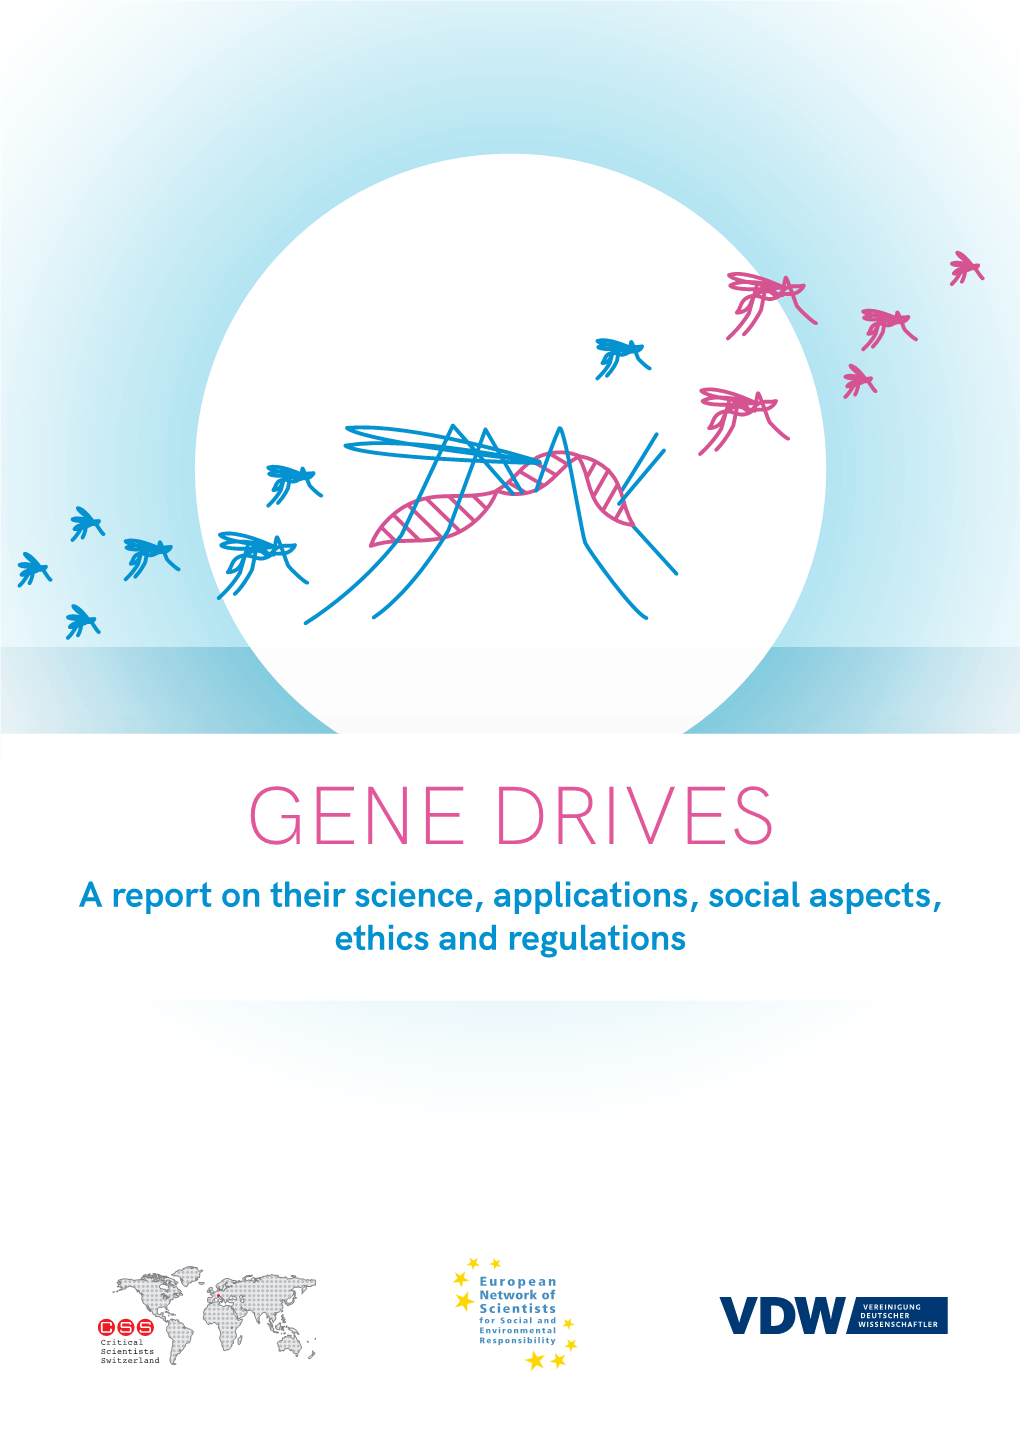 GENE DRIVES a Report on Their Science, Applications, Social Aspects, Ethics and Regulations